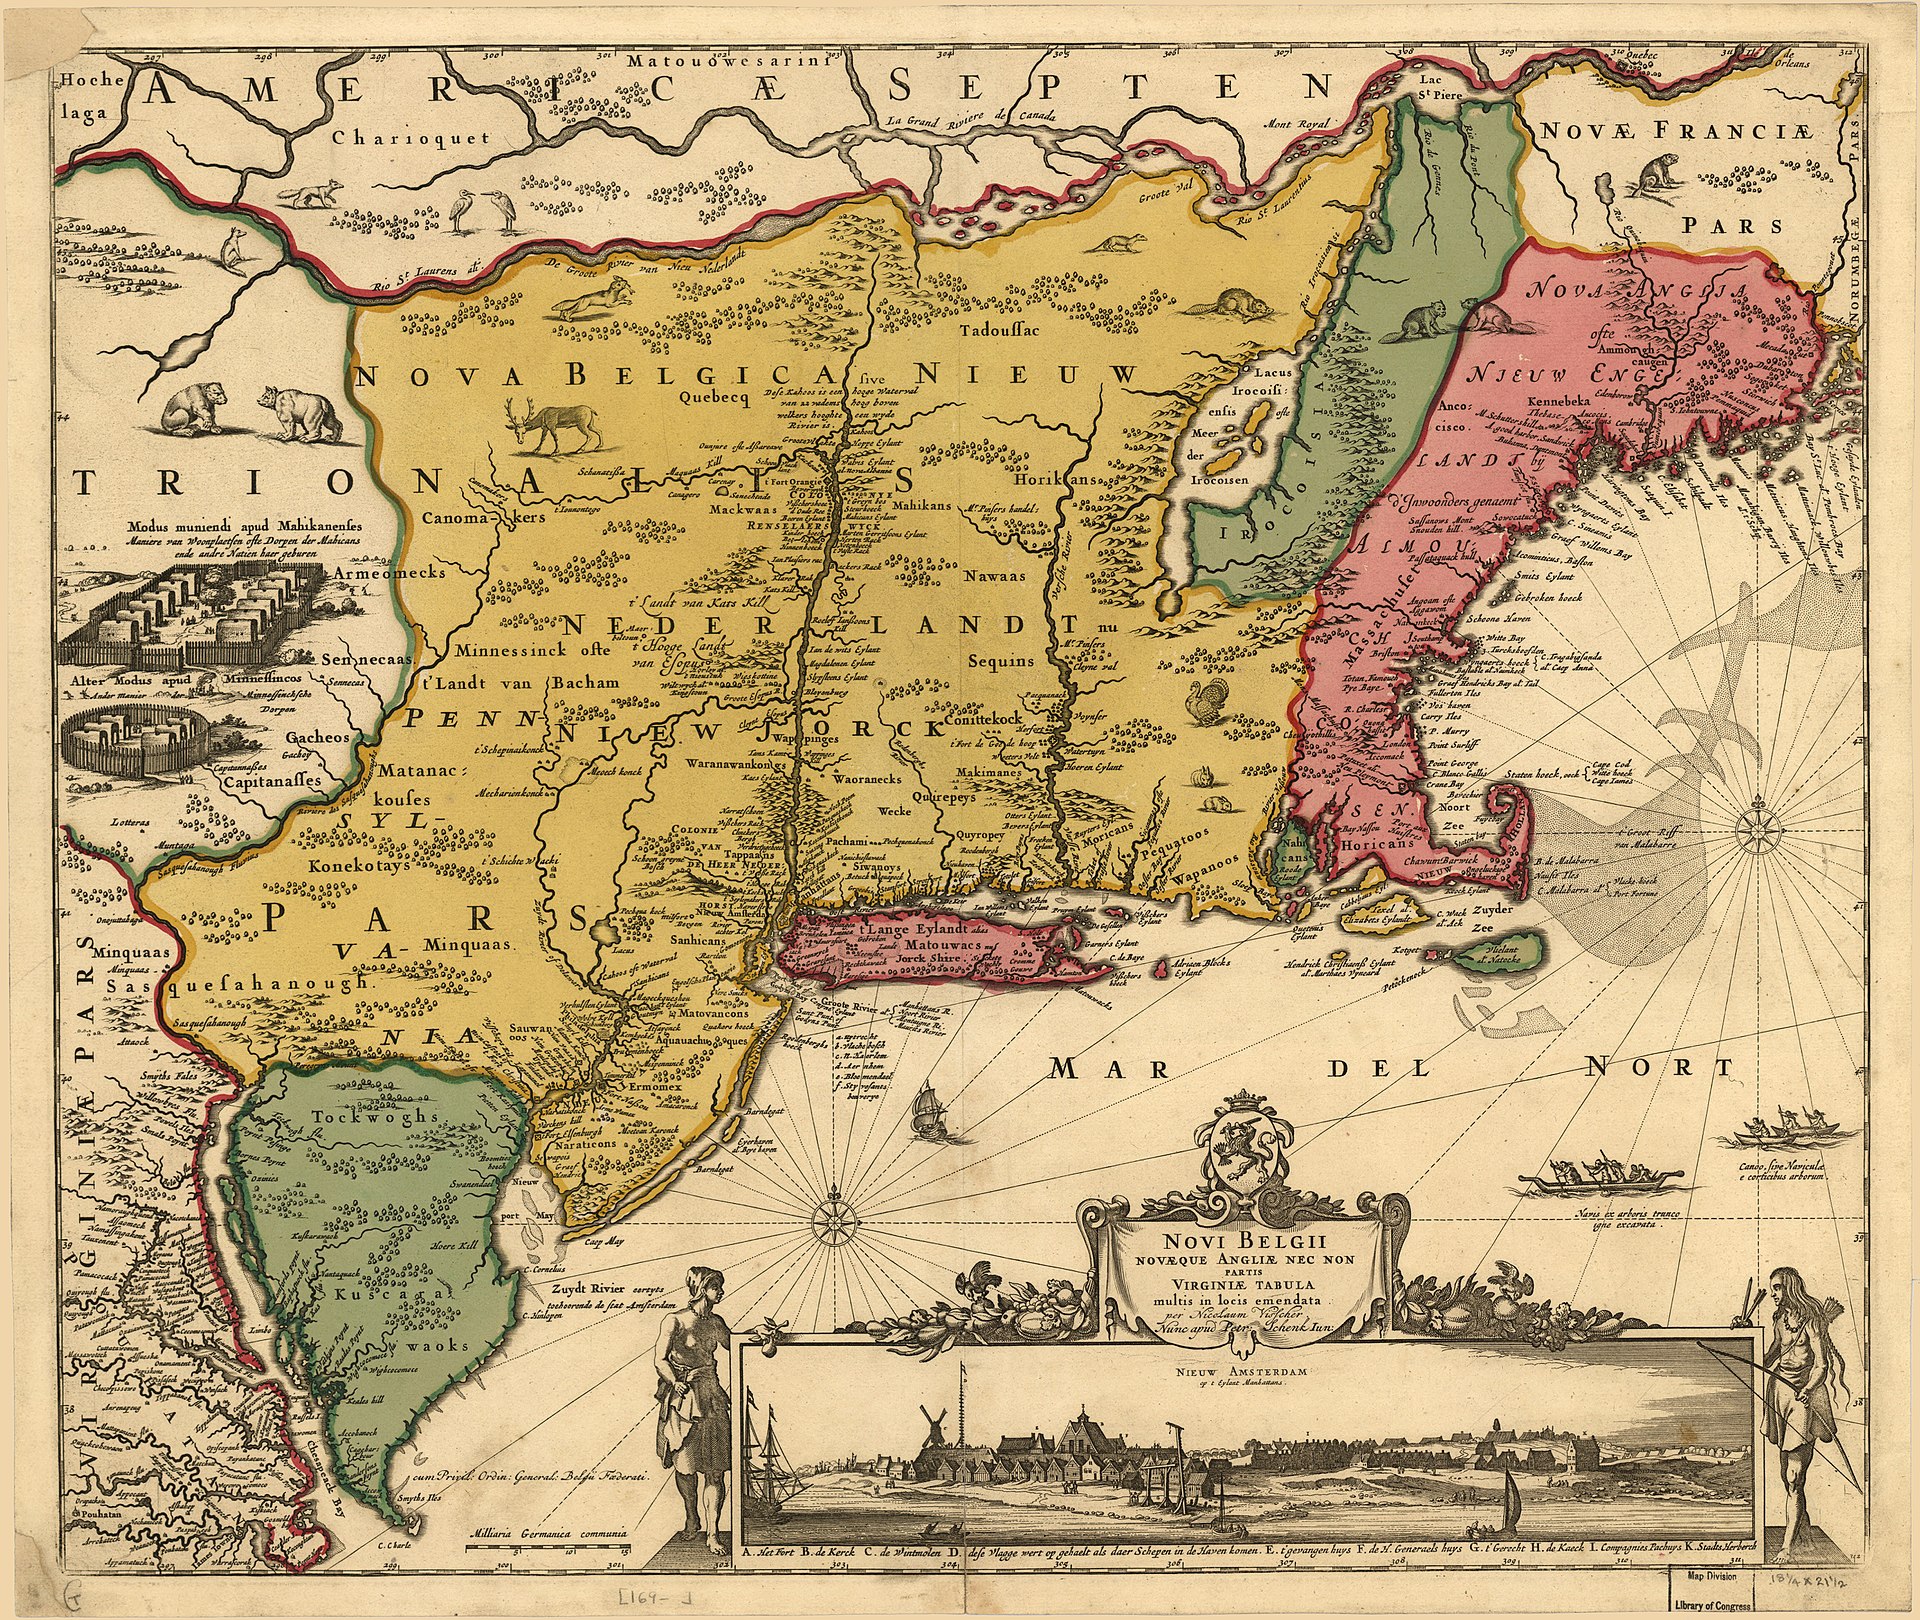 Difference Between New England Colonies and Southern Colonies